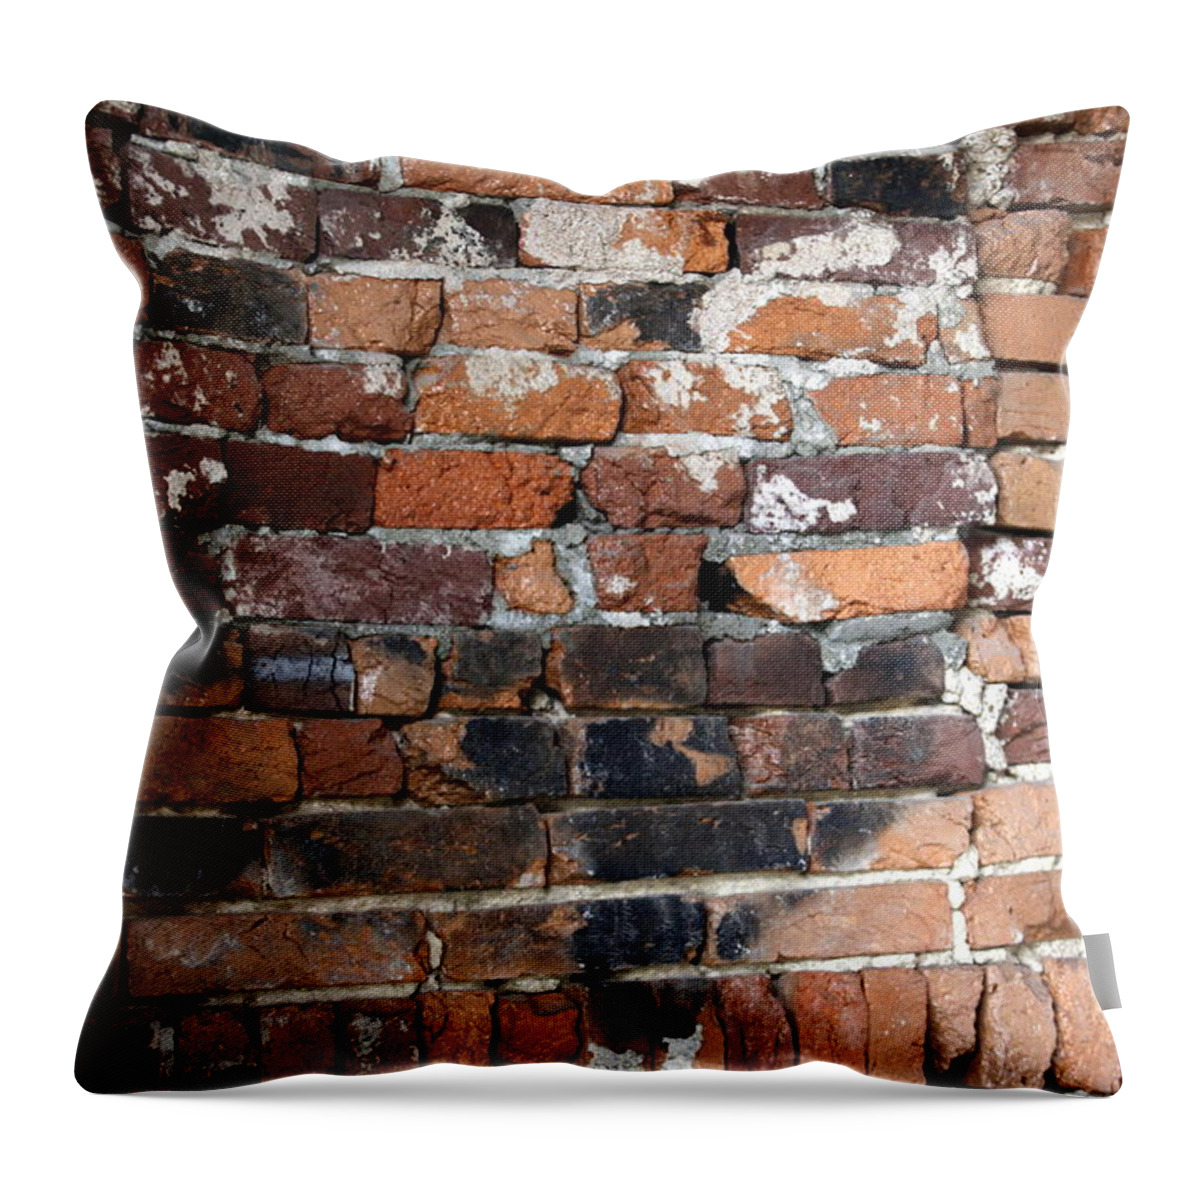 Horizontal Throw Pillow featuring the photograph Brick Wall by Valerie Collins